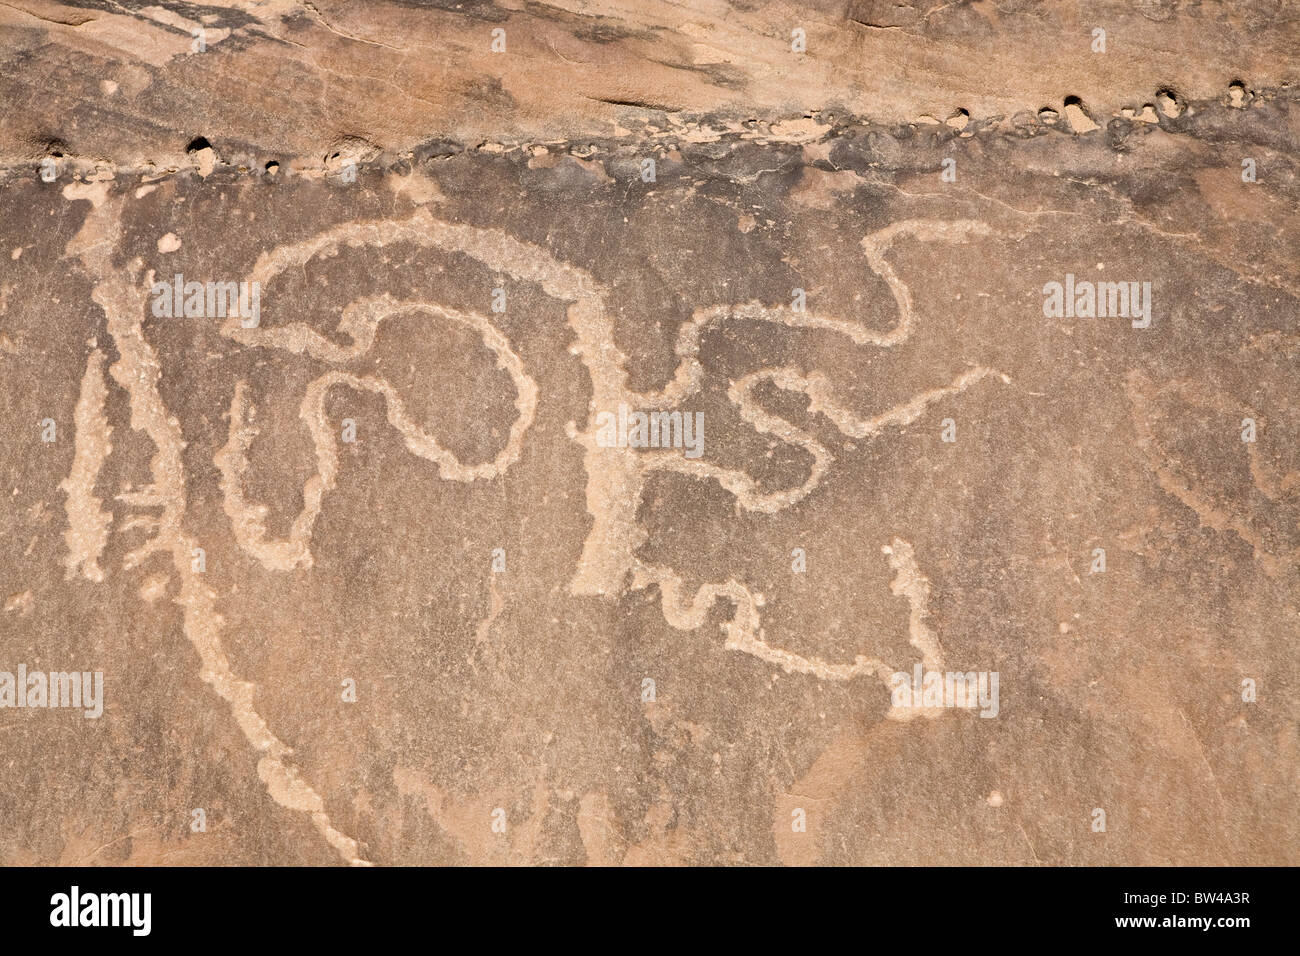 Possible depiction of an ancient map of the wadi system in Wadi Umm Salam, Eastern Desert of Egypt Stock Photo